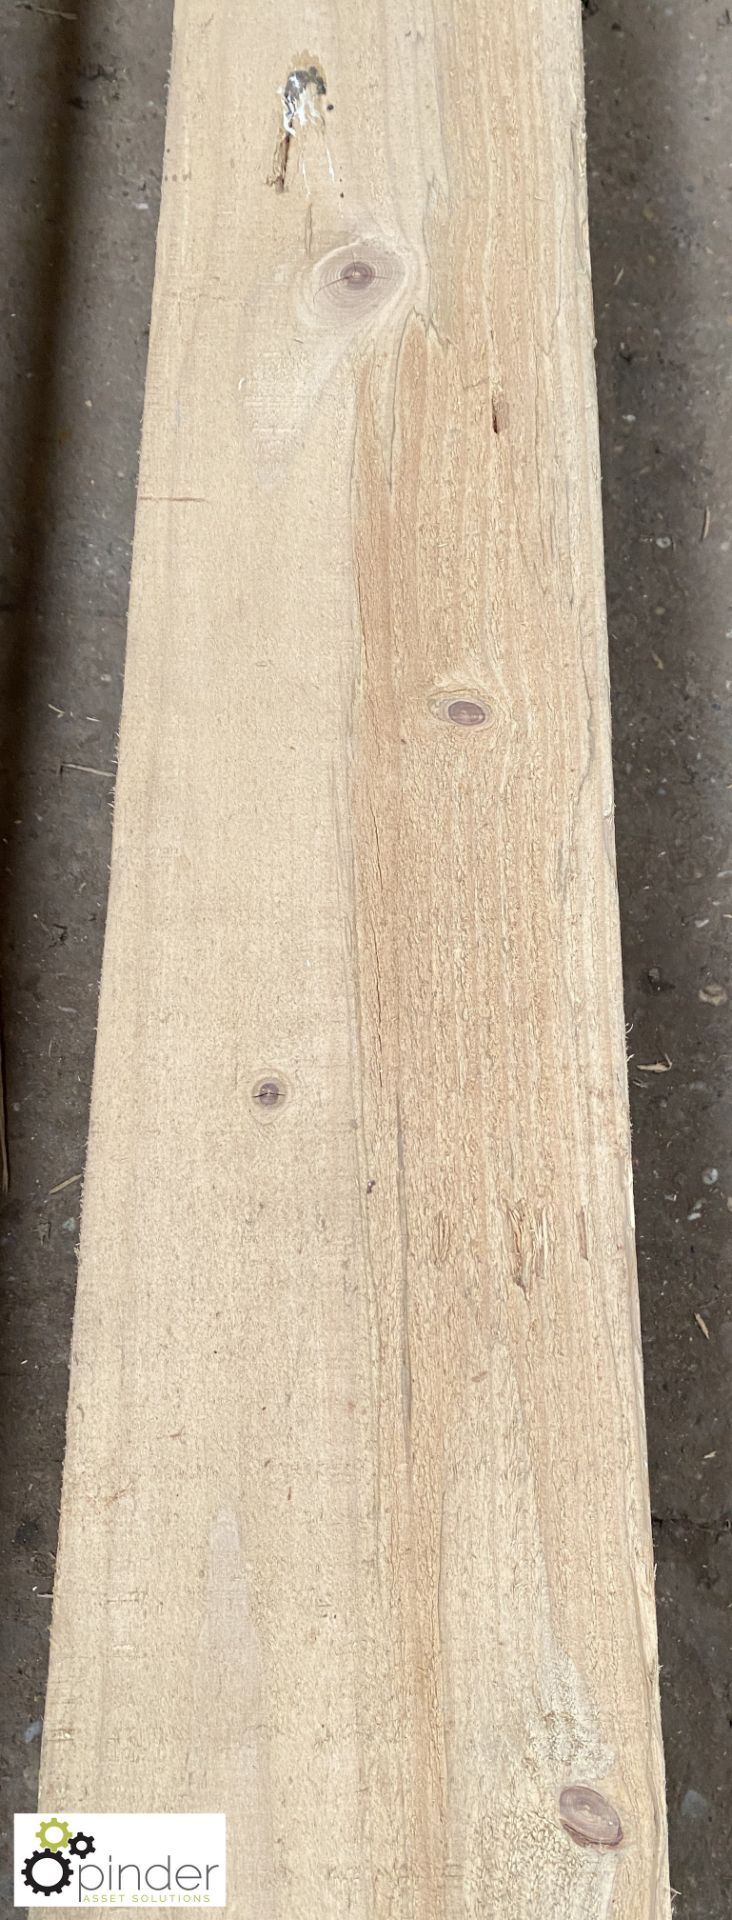 Air dried Pine Beam, 3010mm x 170mm x 165mm - Image 5 of 6